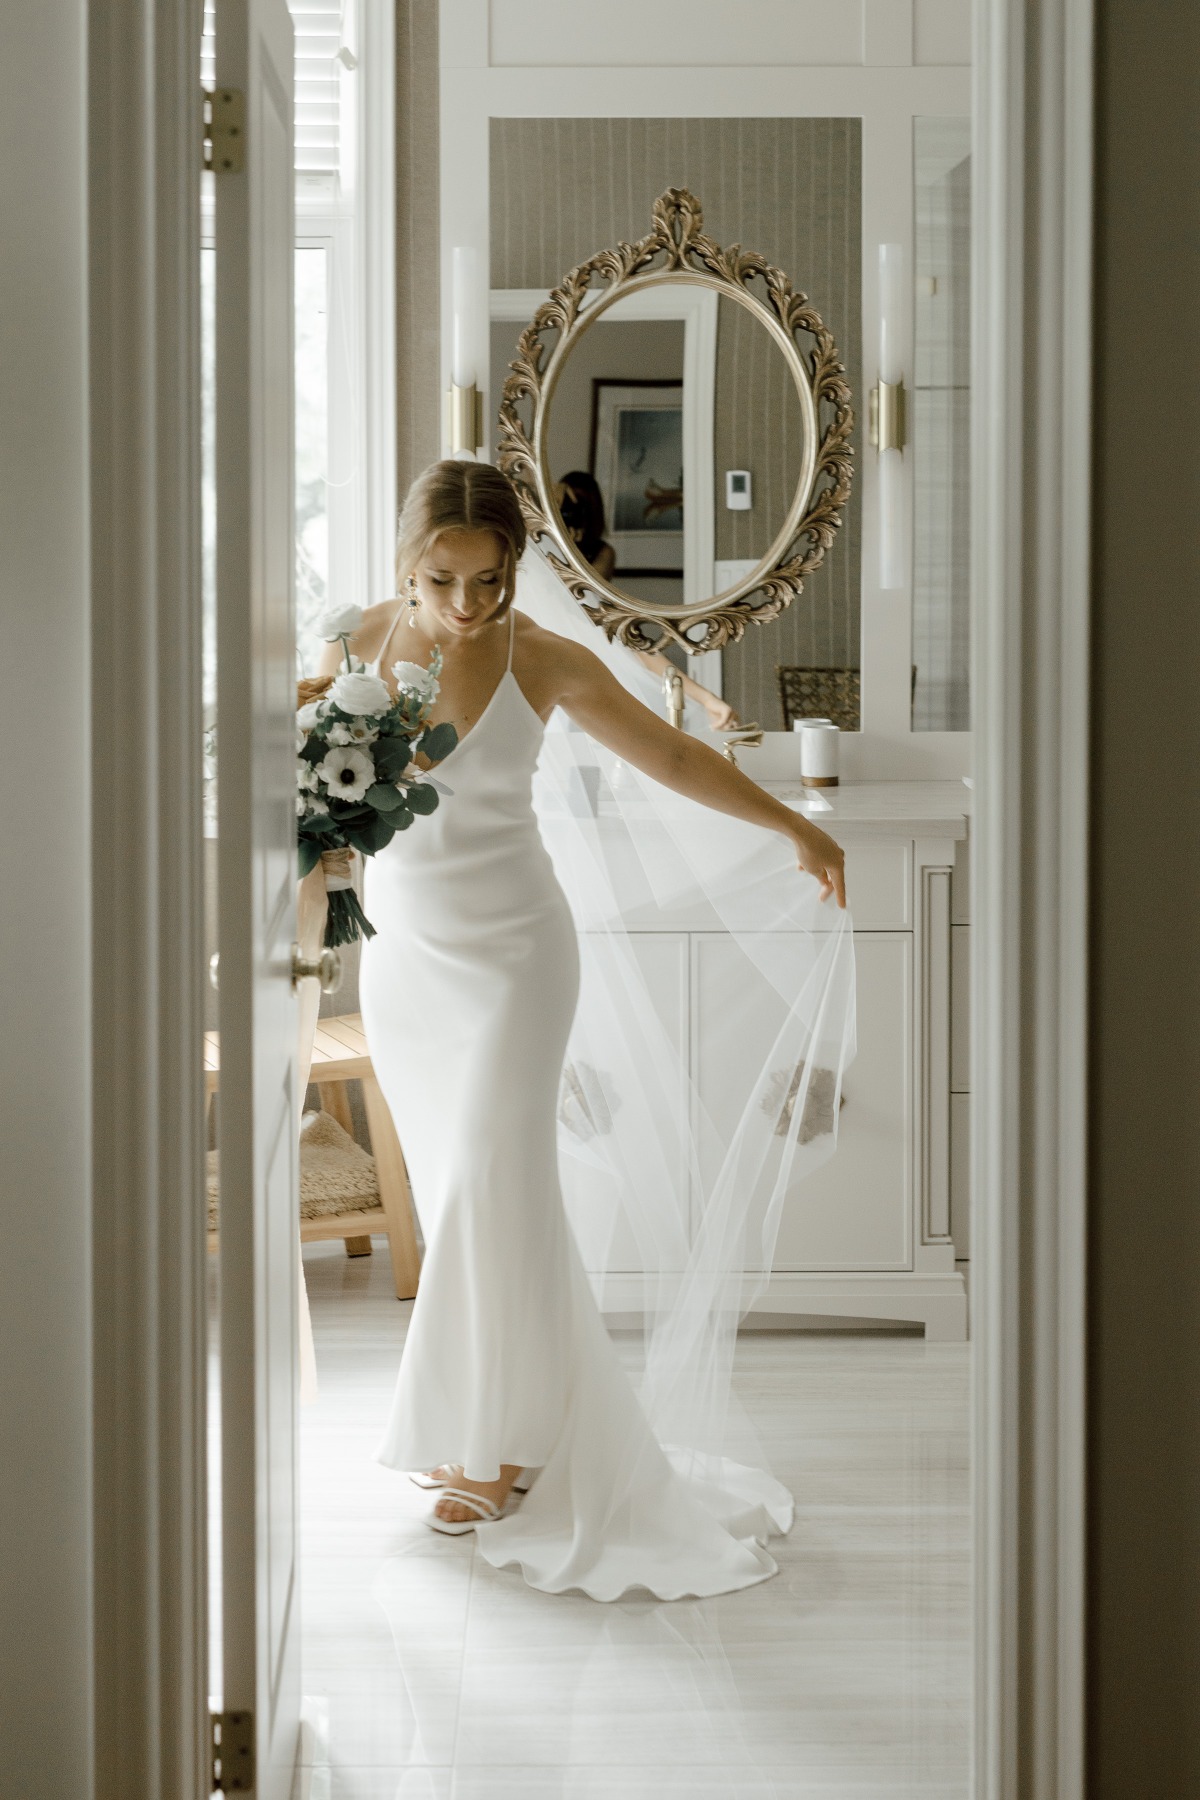 Bridal portrait in front of ornate bathroom mirror holding bouquet and veil